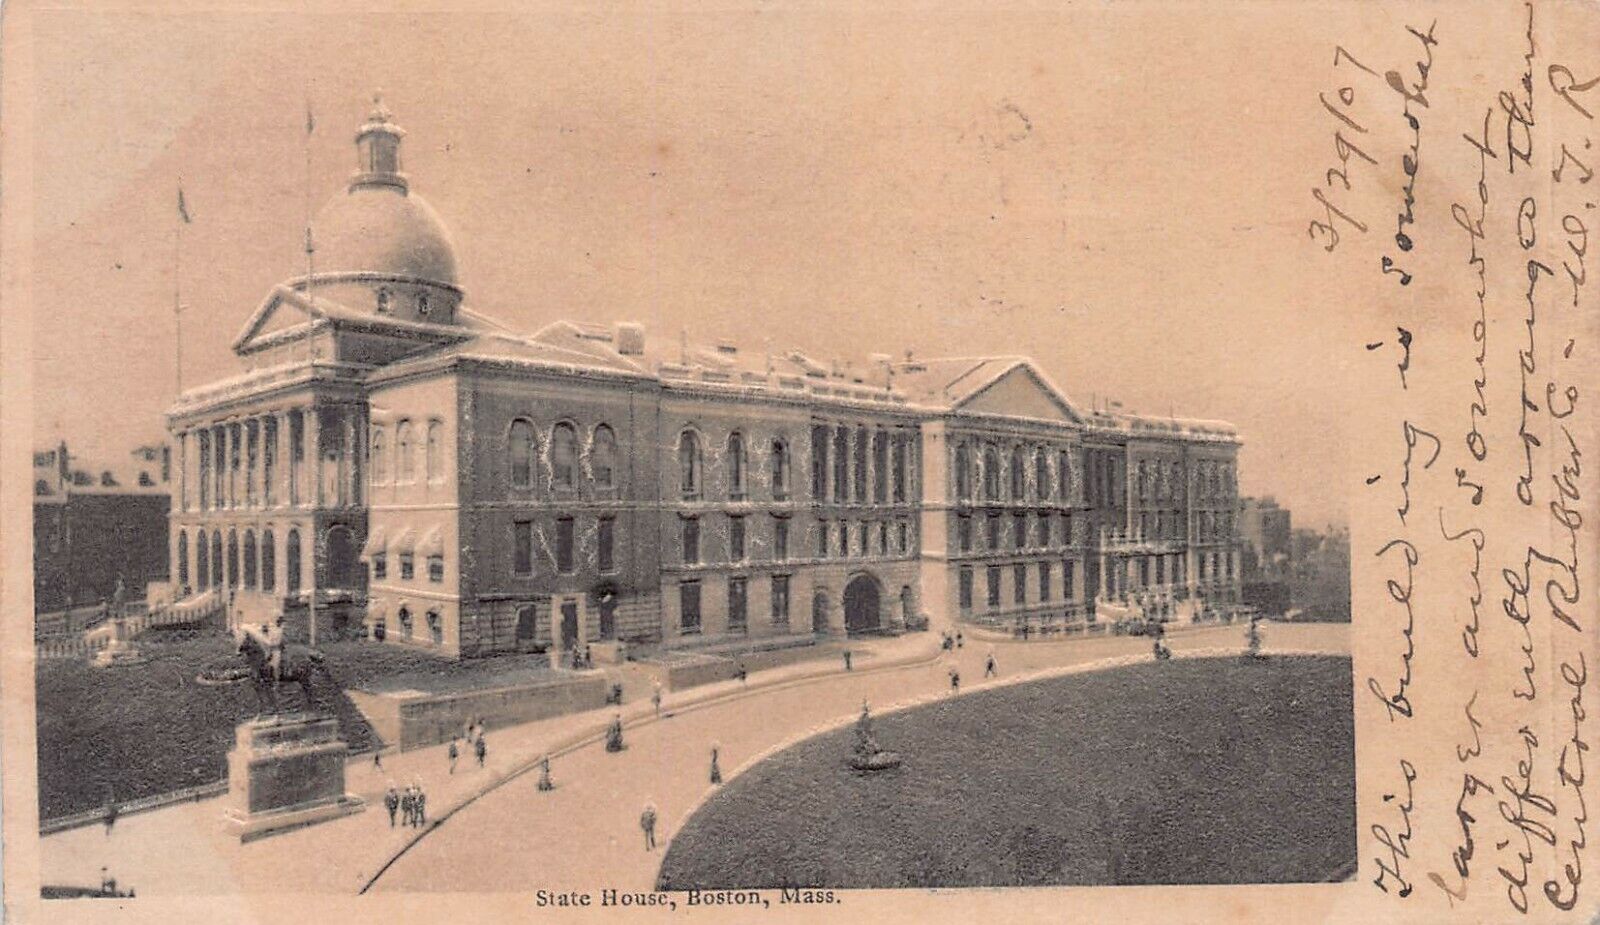 State House, Boston, Massachusetts, Very Early Embossed Postcard, Used in 1907